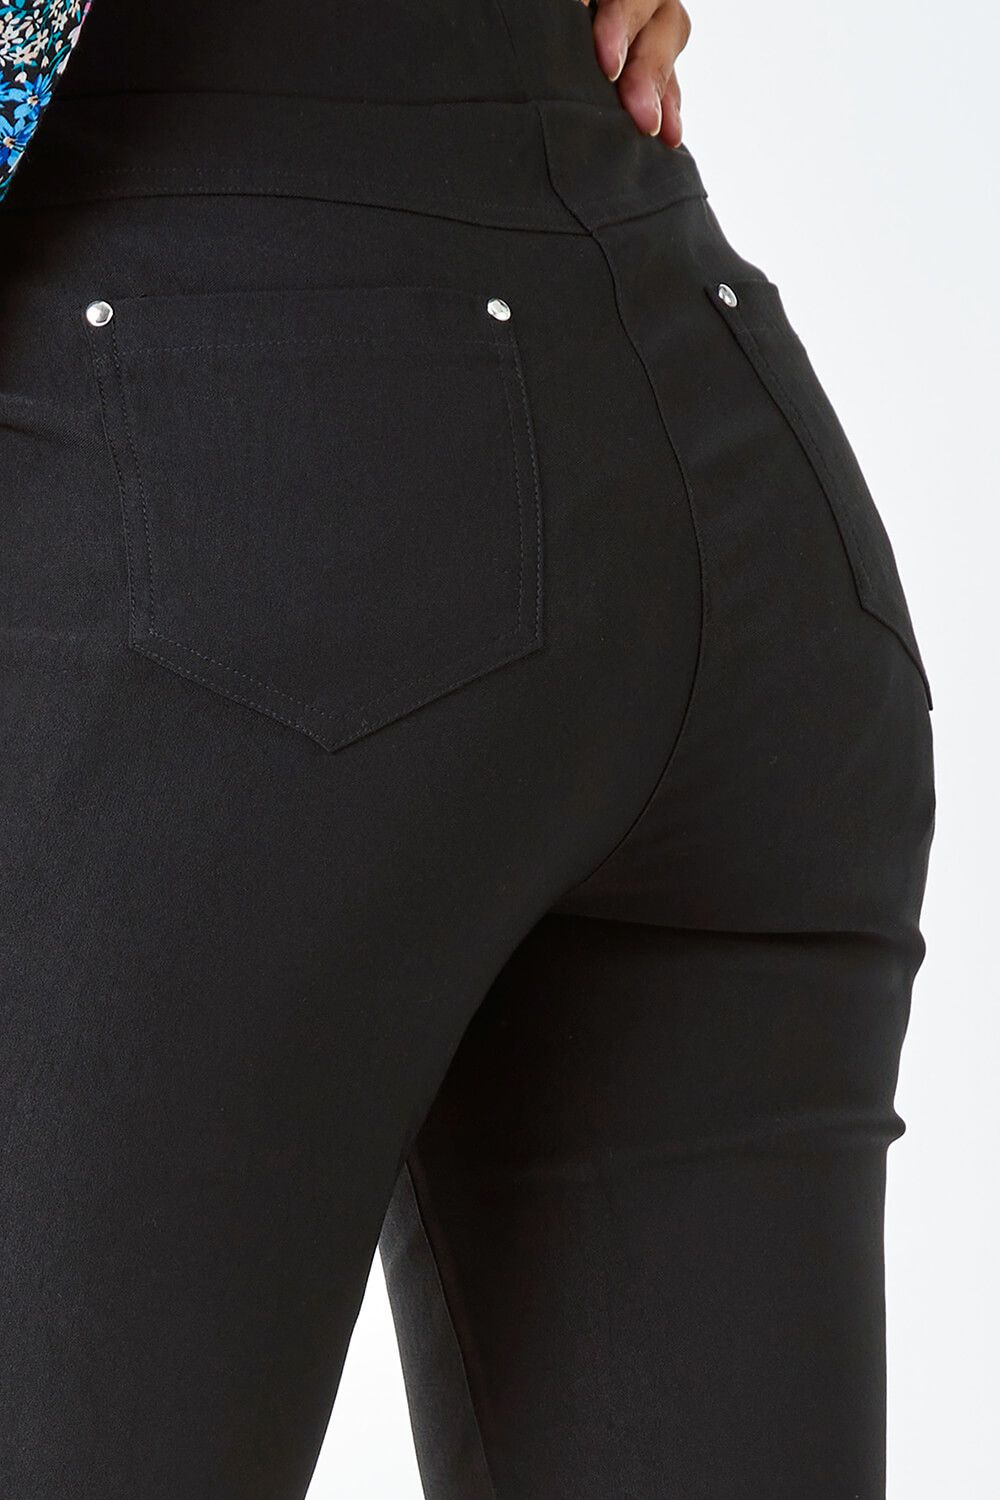 Black Stretch Jean Trouser, Image 5 of 5